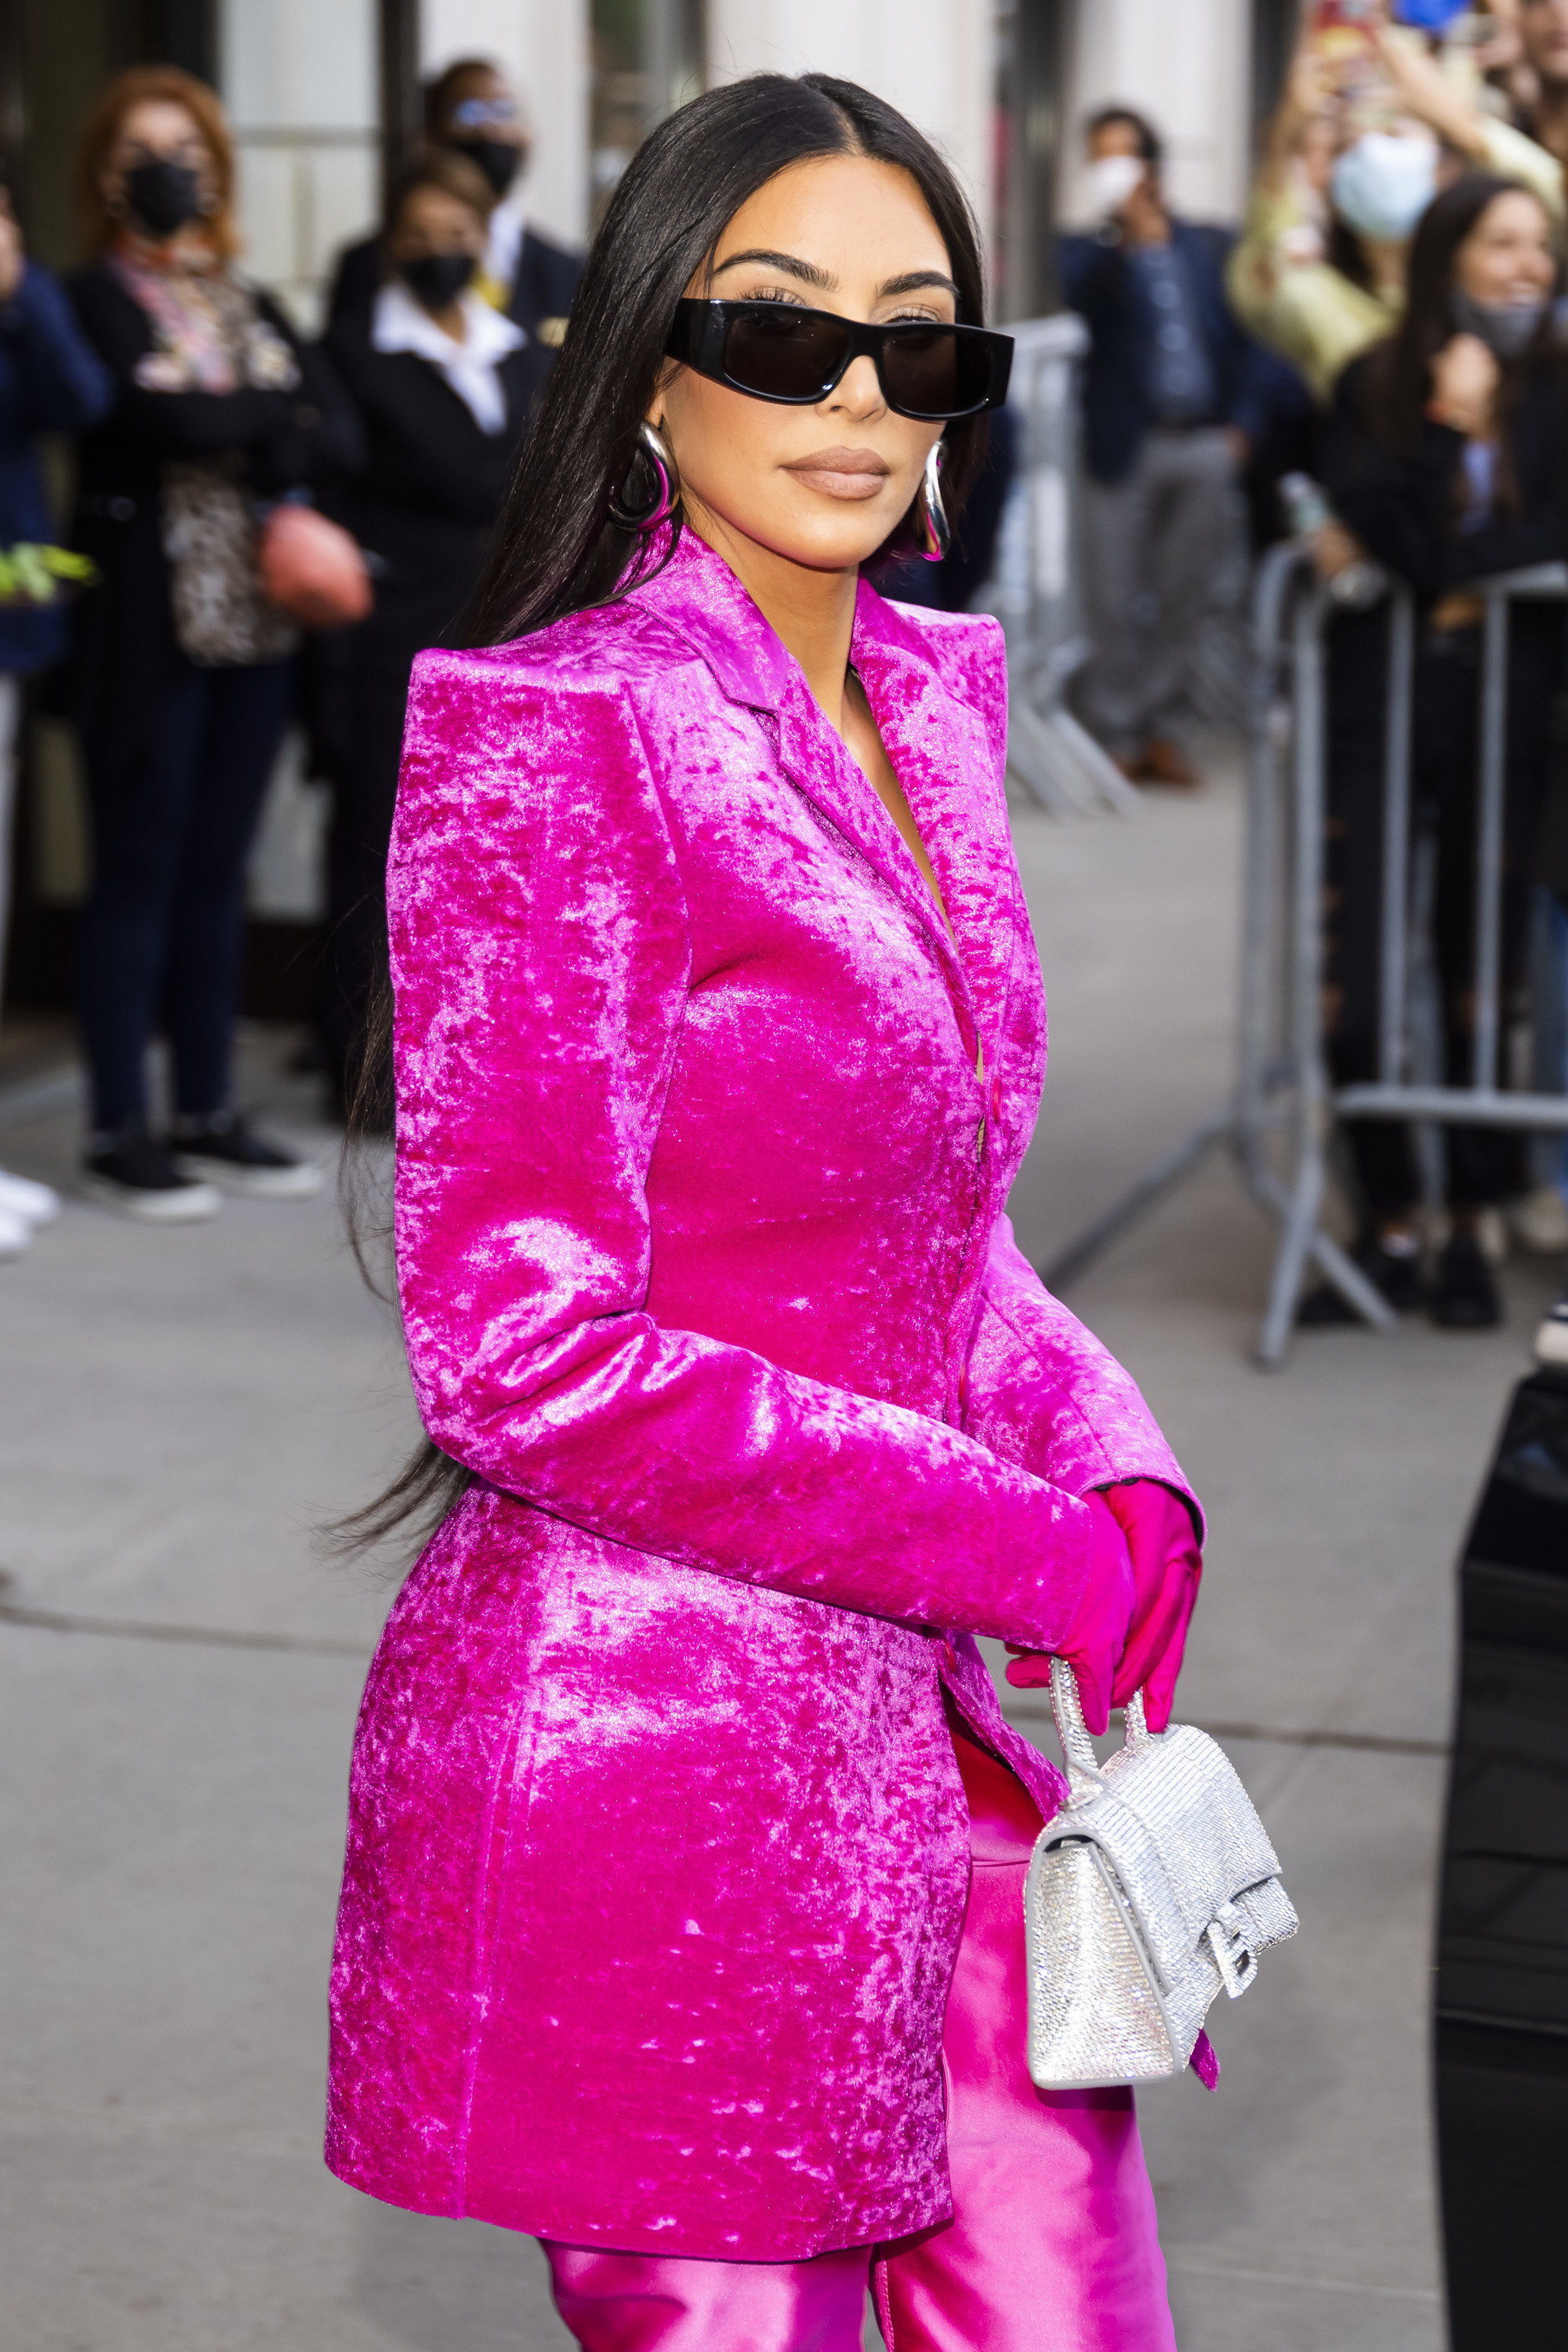 Kim walking out of a building in a long velvet blazer, matching pants, gloves, oversized glasses, and holding a small bejeweled purse